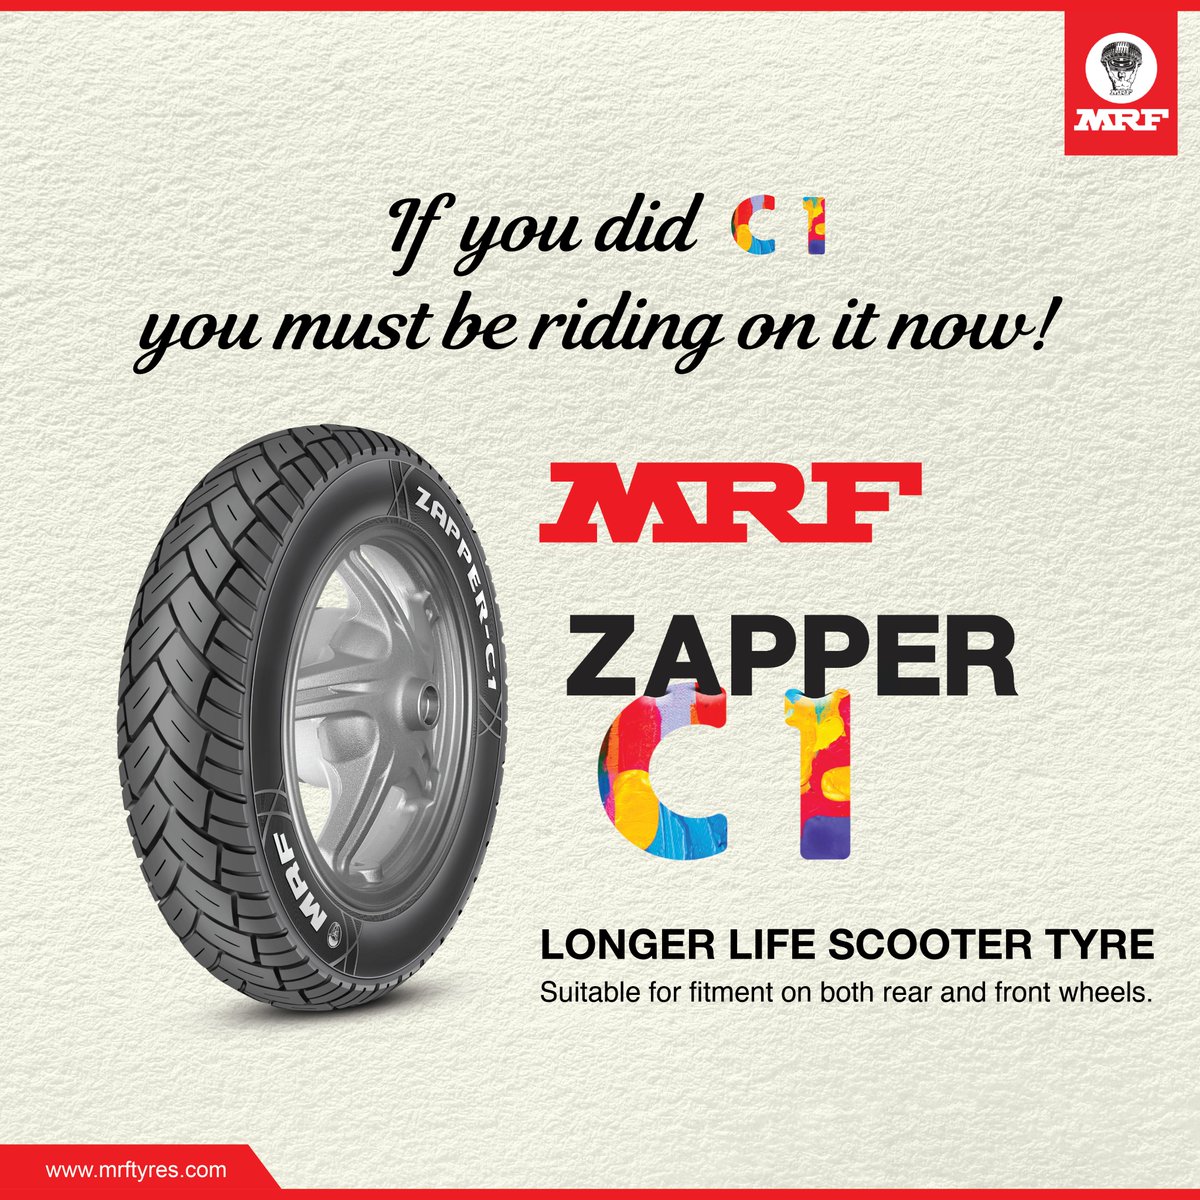 Give your scooter long-lasting performance with the MRF ZAPPER C1.​ After all, if you did C1, you must be riding on it now!​ ​Get yours today! Click the link mrftyres.com to find your nearest MRF Authorised dealer.